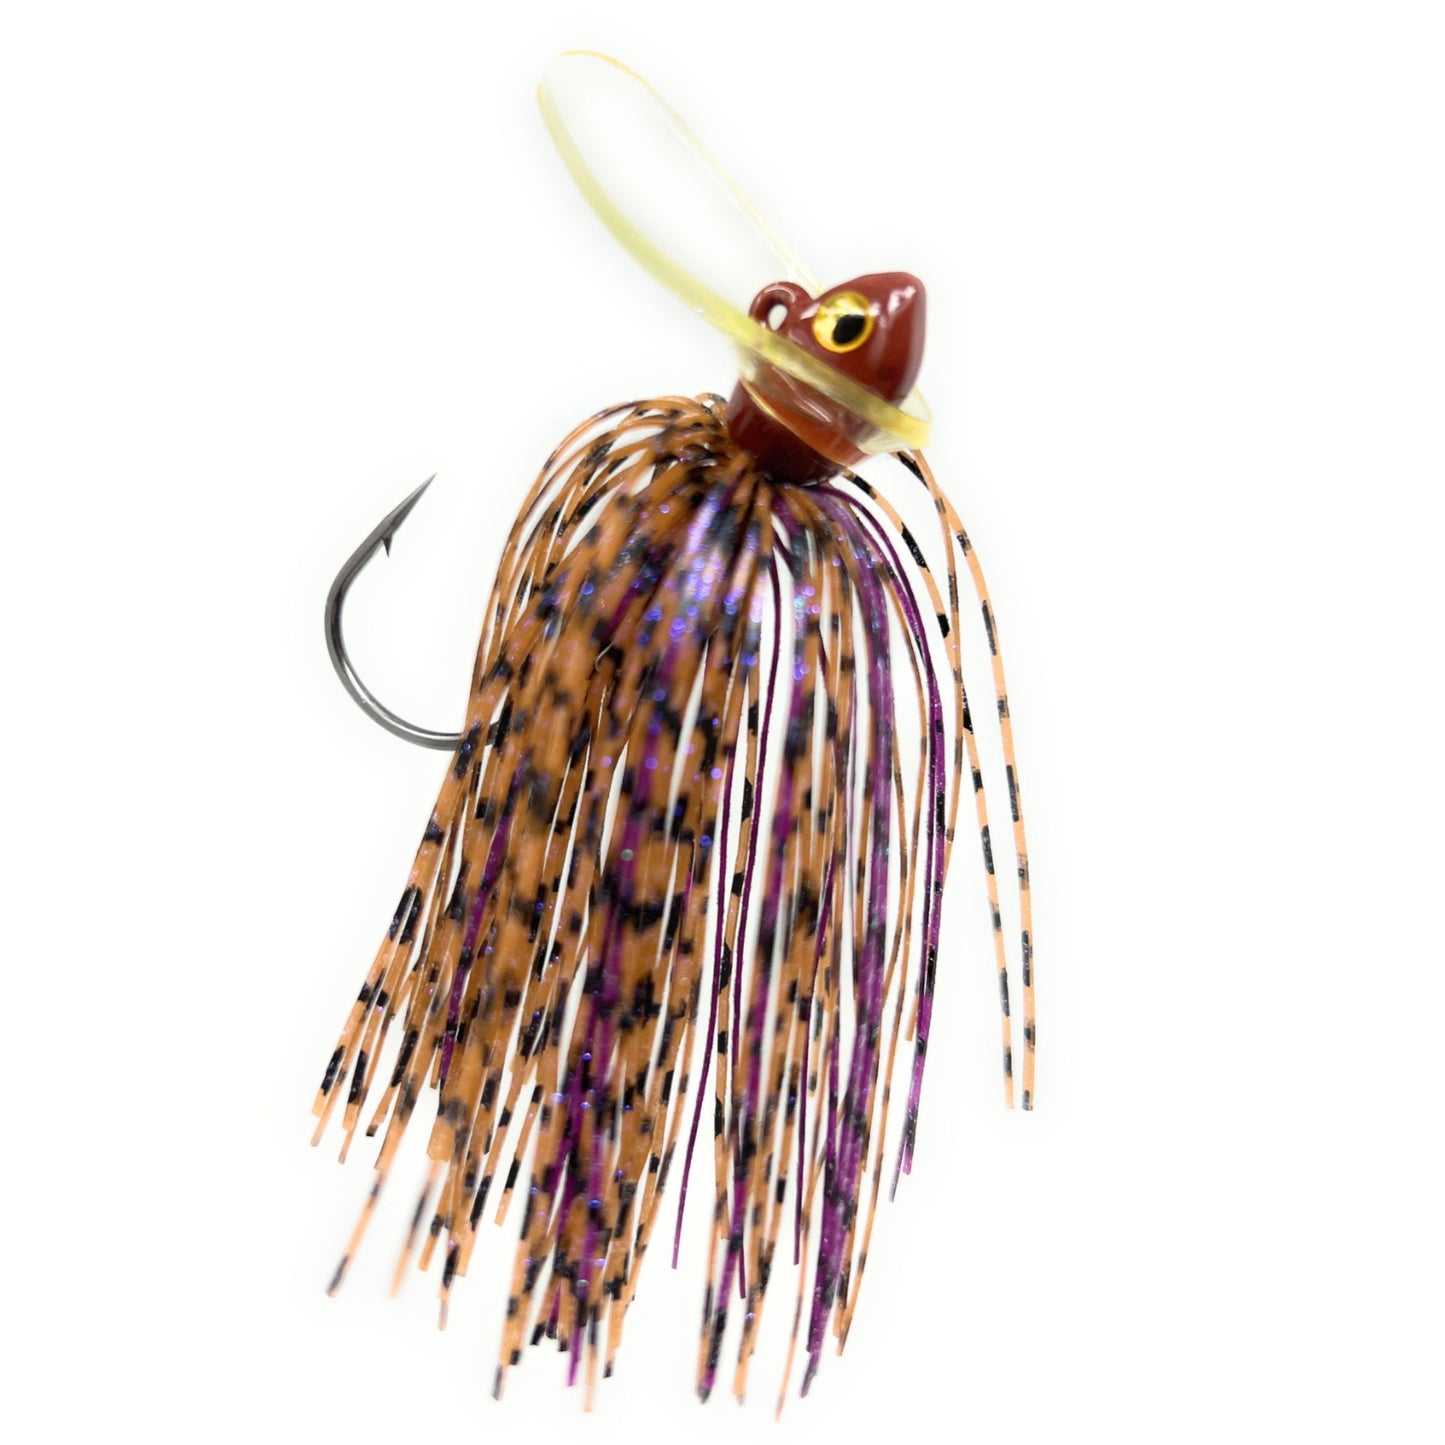 Reaction Tackle Tungsten Scrounger Jigs (2-Pack)